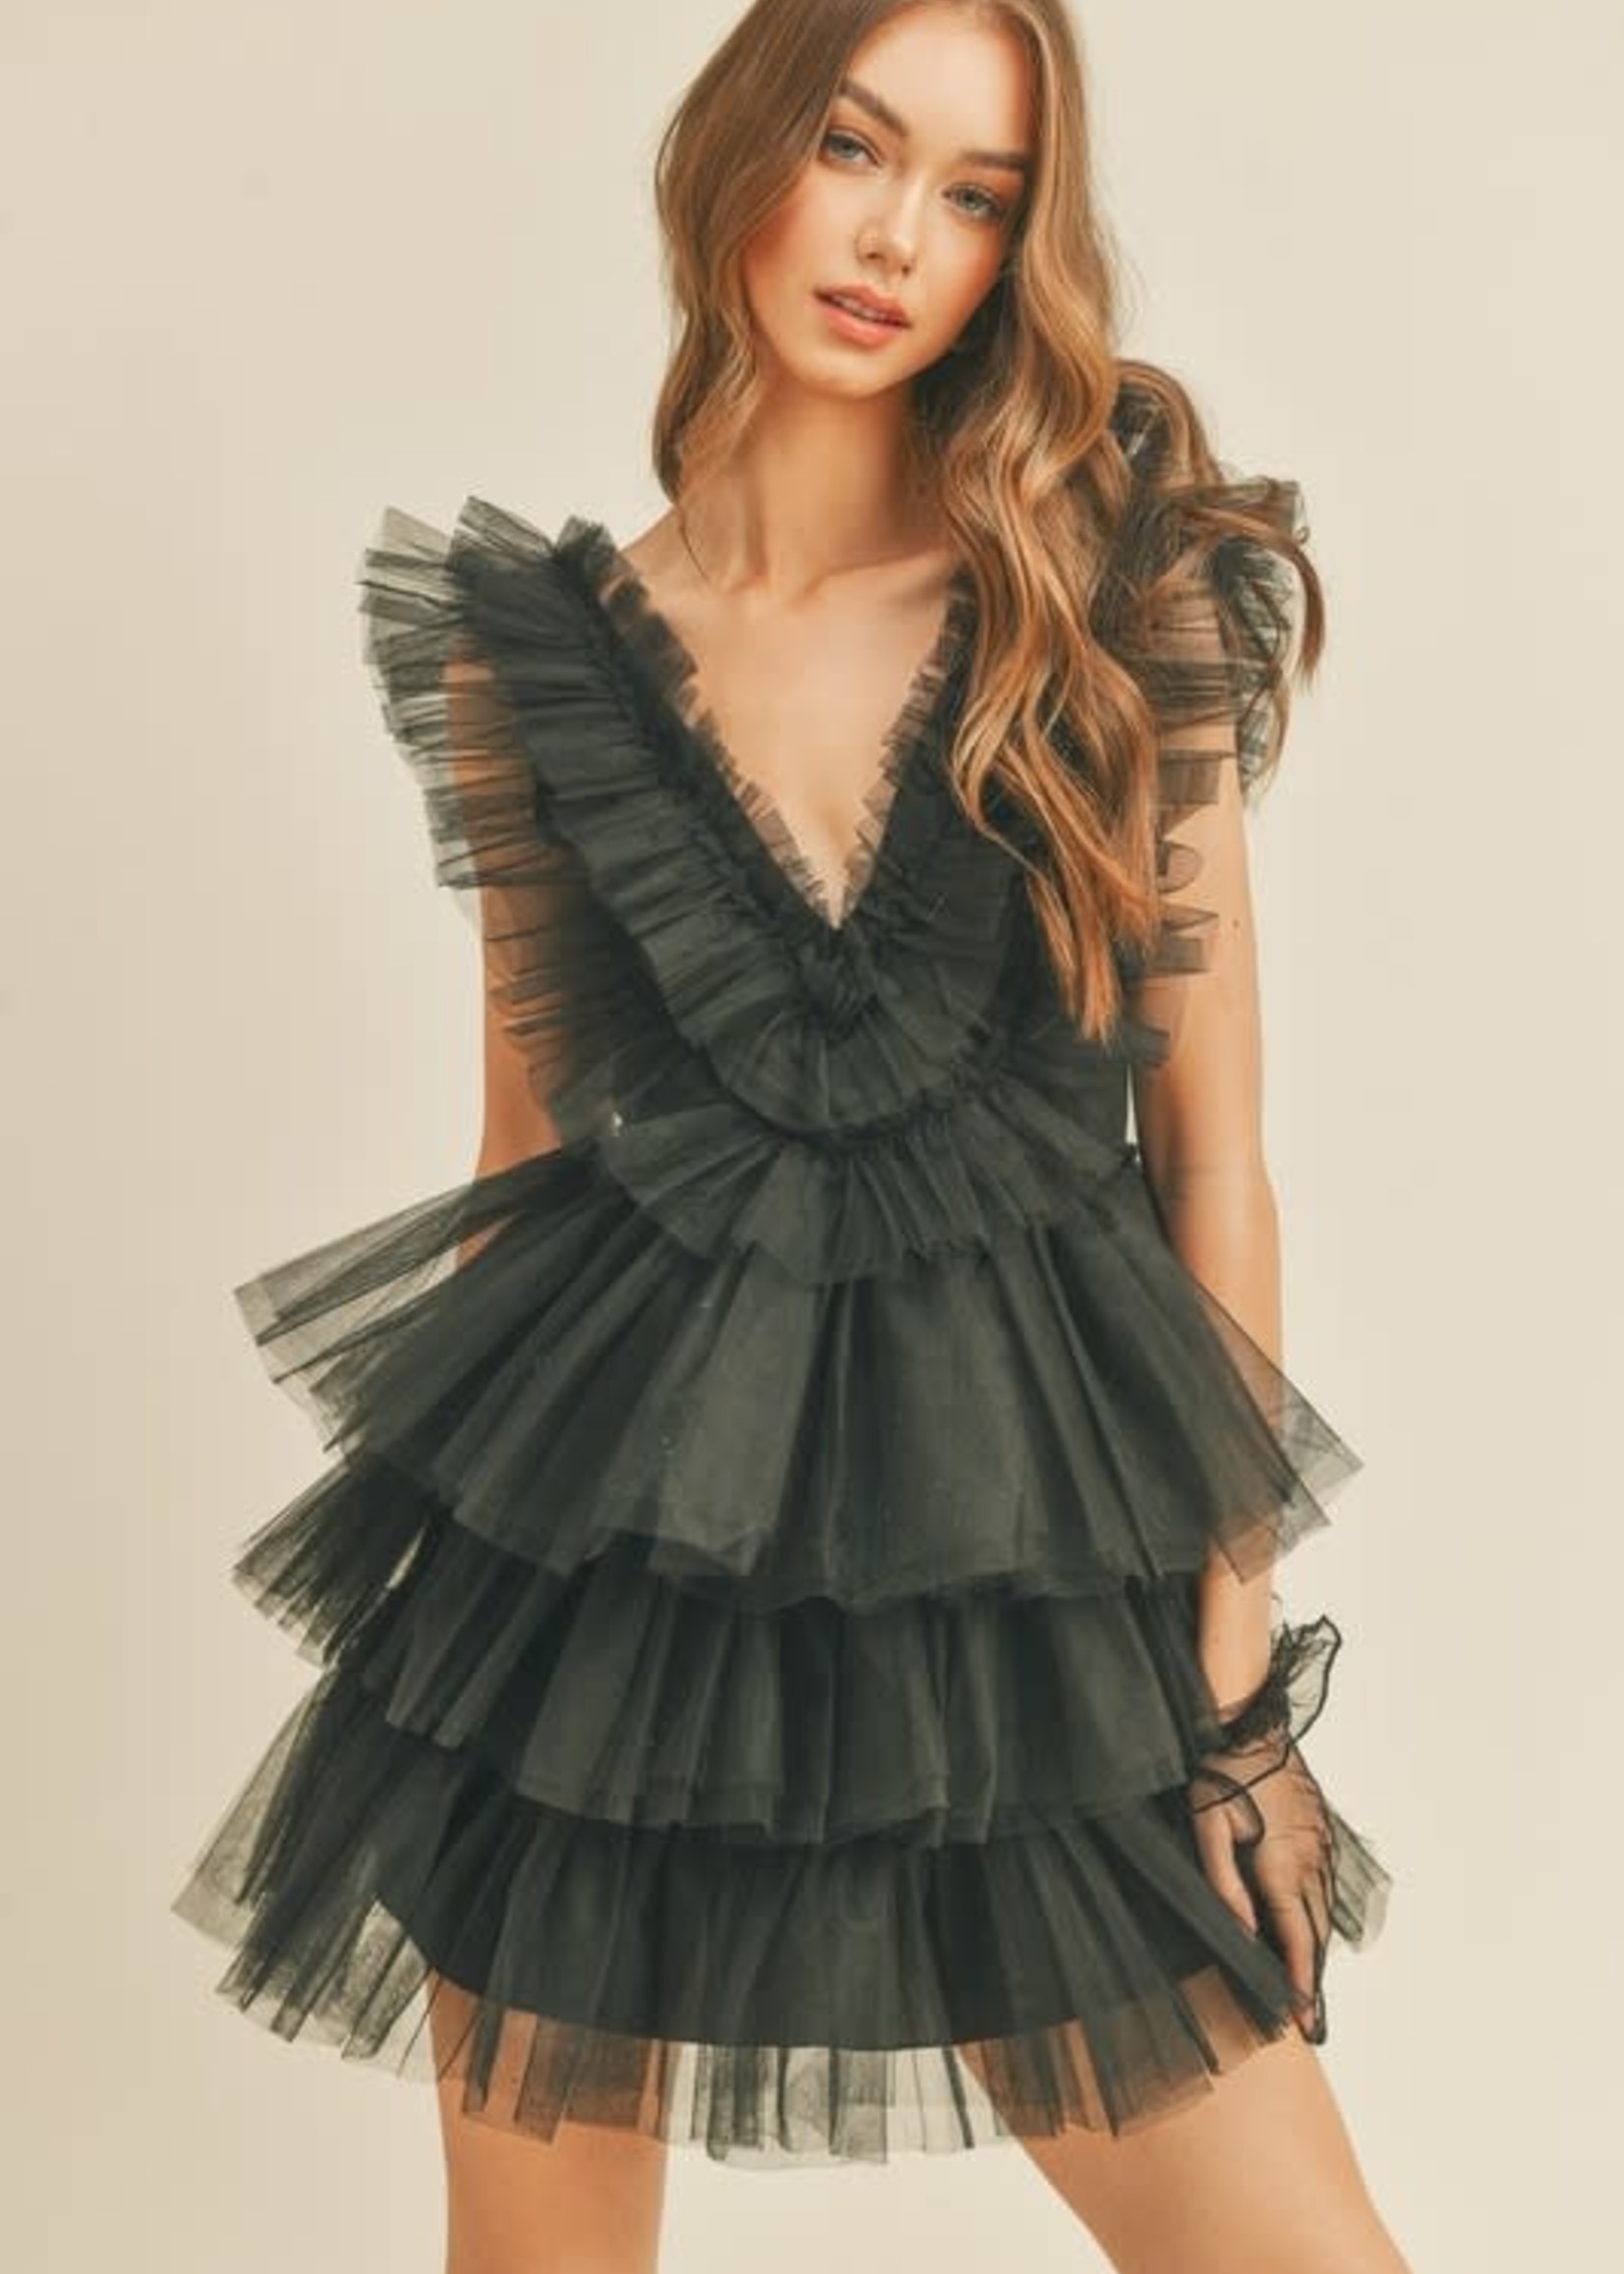 Frill Of The Moment Black Dress